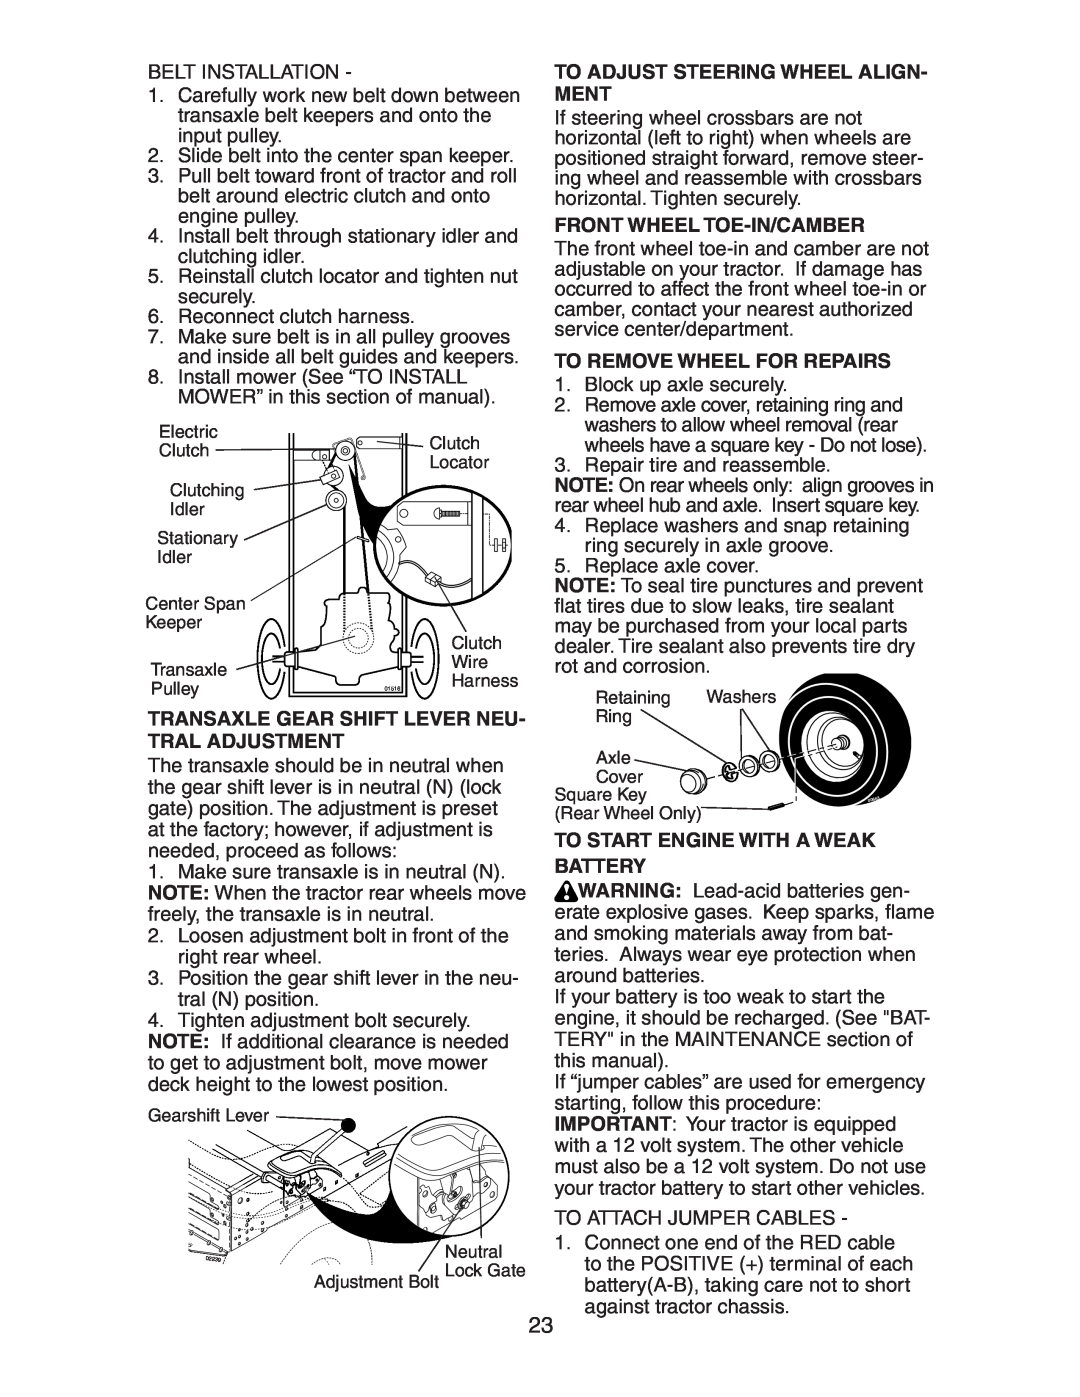 Poulan CO18542STC manual To Adjust Steering Wheel Align- Ment, Front Wheel Toe-In/Camber, To Remove Wheel For Repairs 